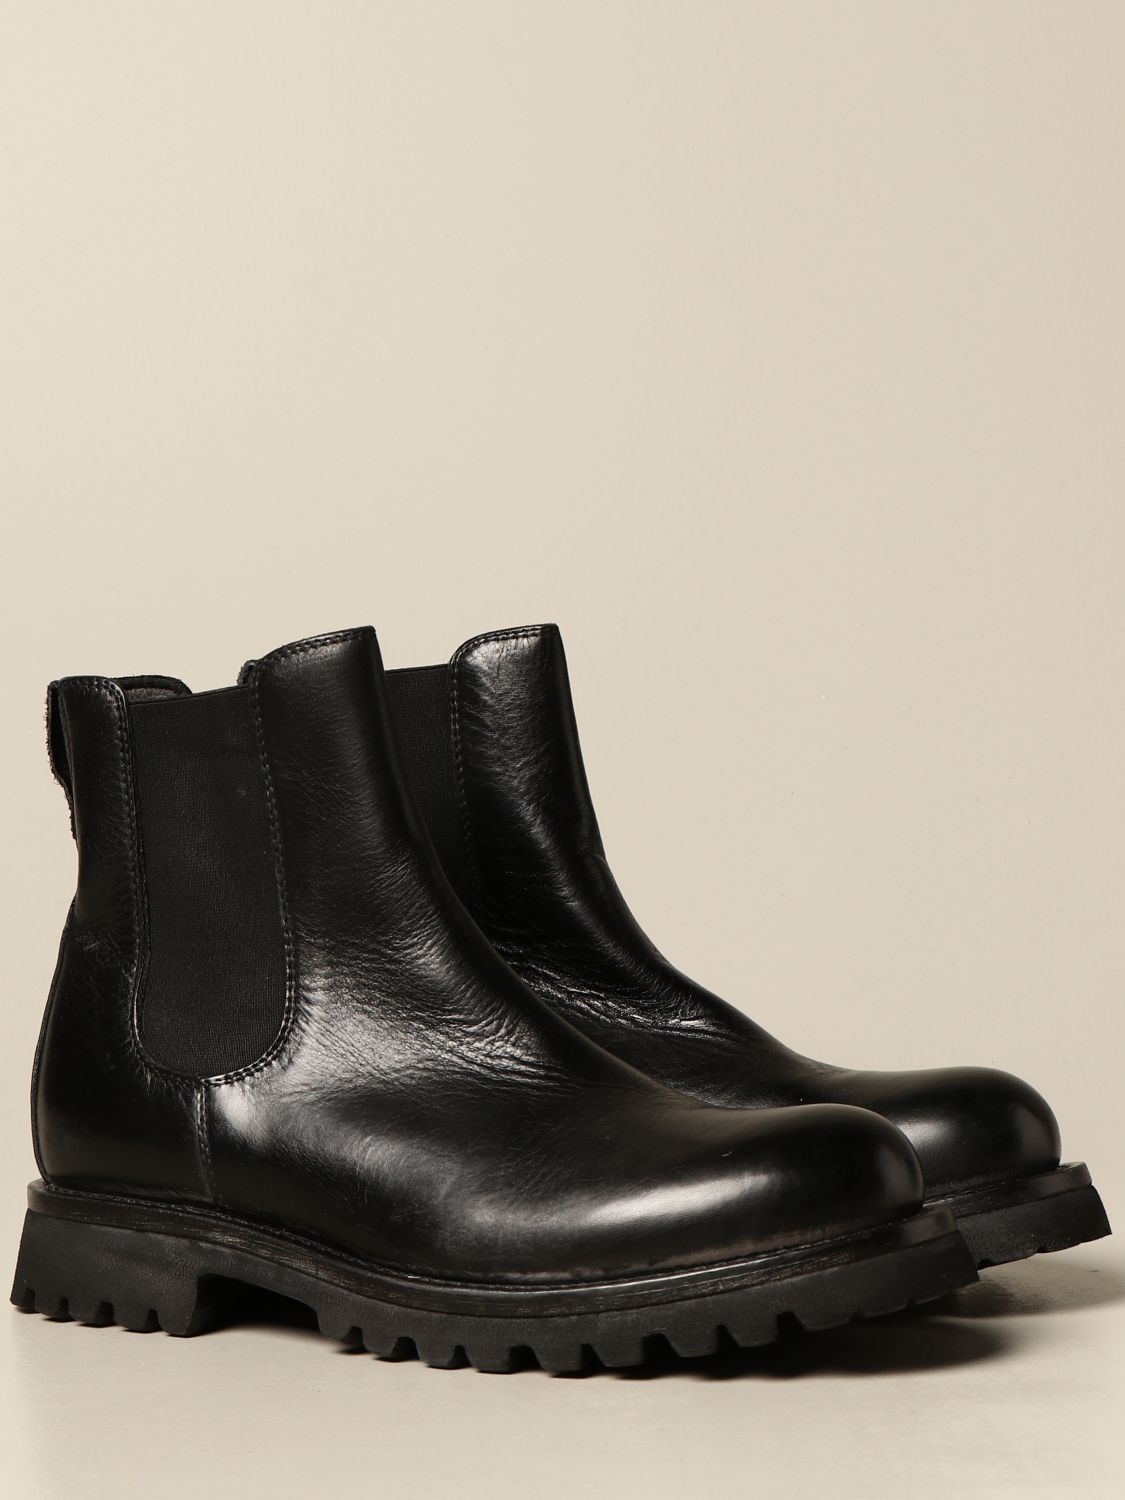 panik jord virtuel Moma Outlet: boots for man - Black | Moma boots 2CW122 online on GIGLIO.COM